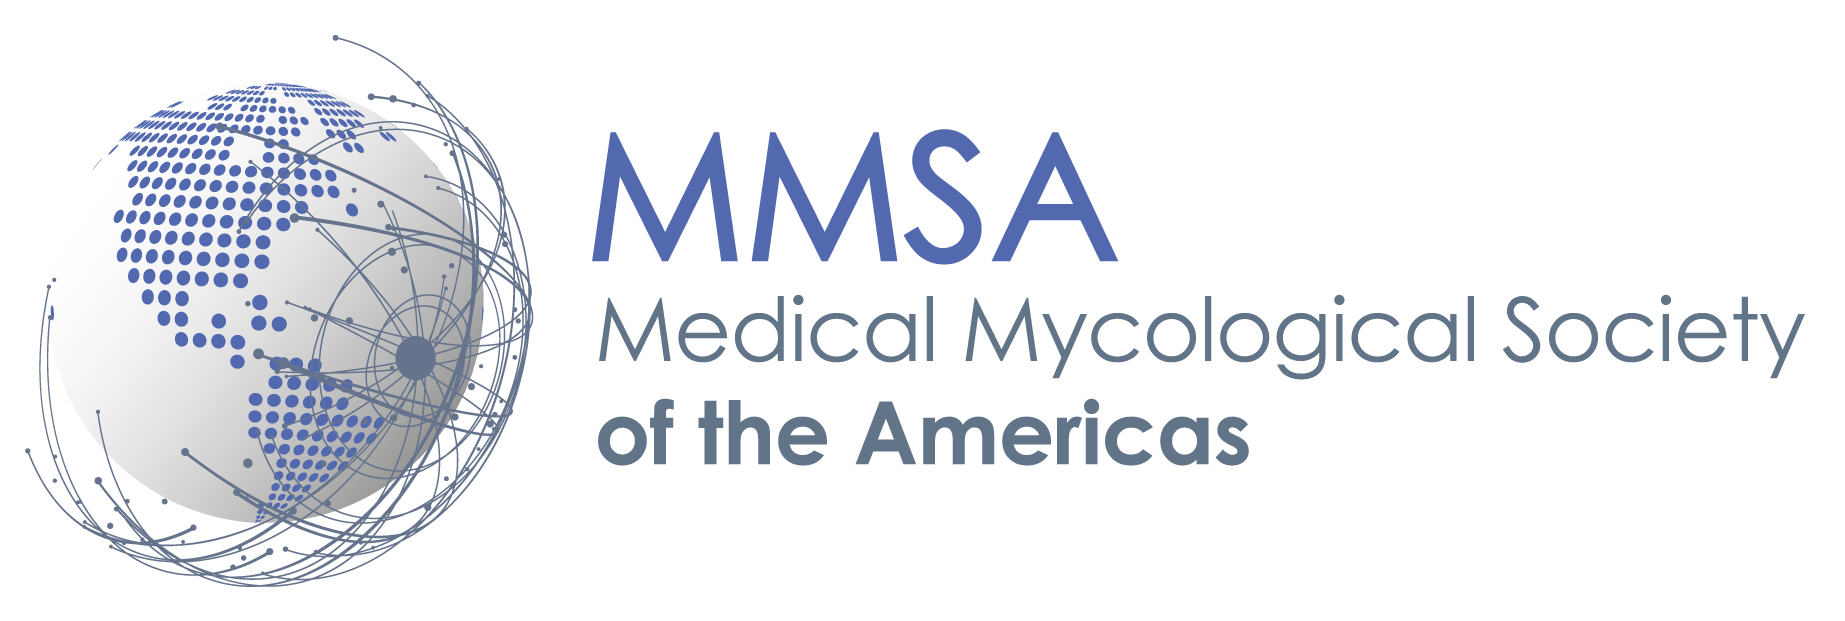 Medical Mycological Society of the Americas